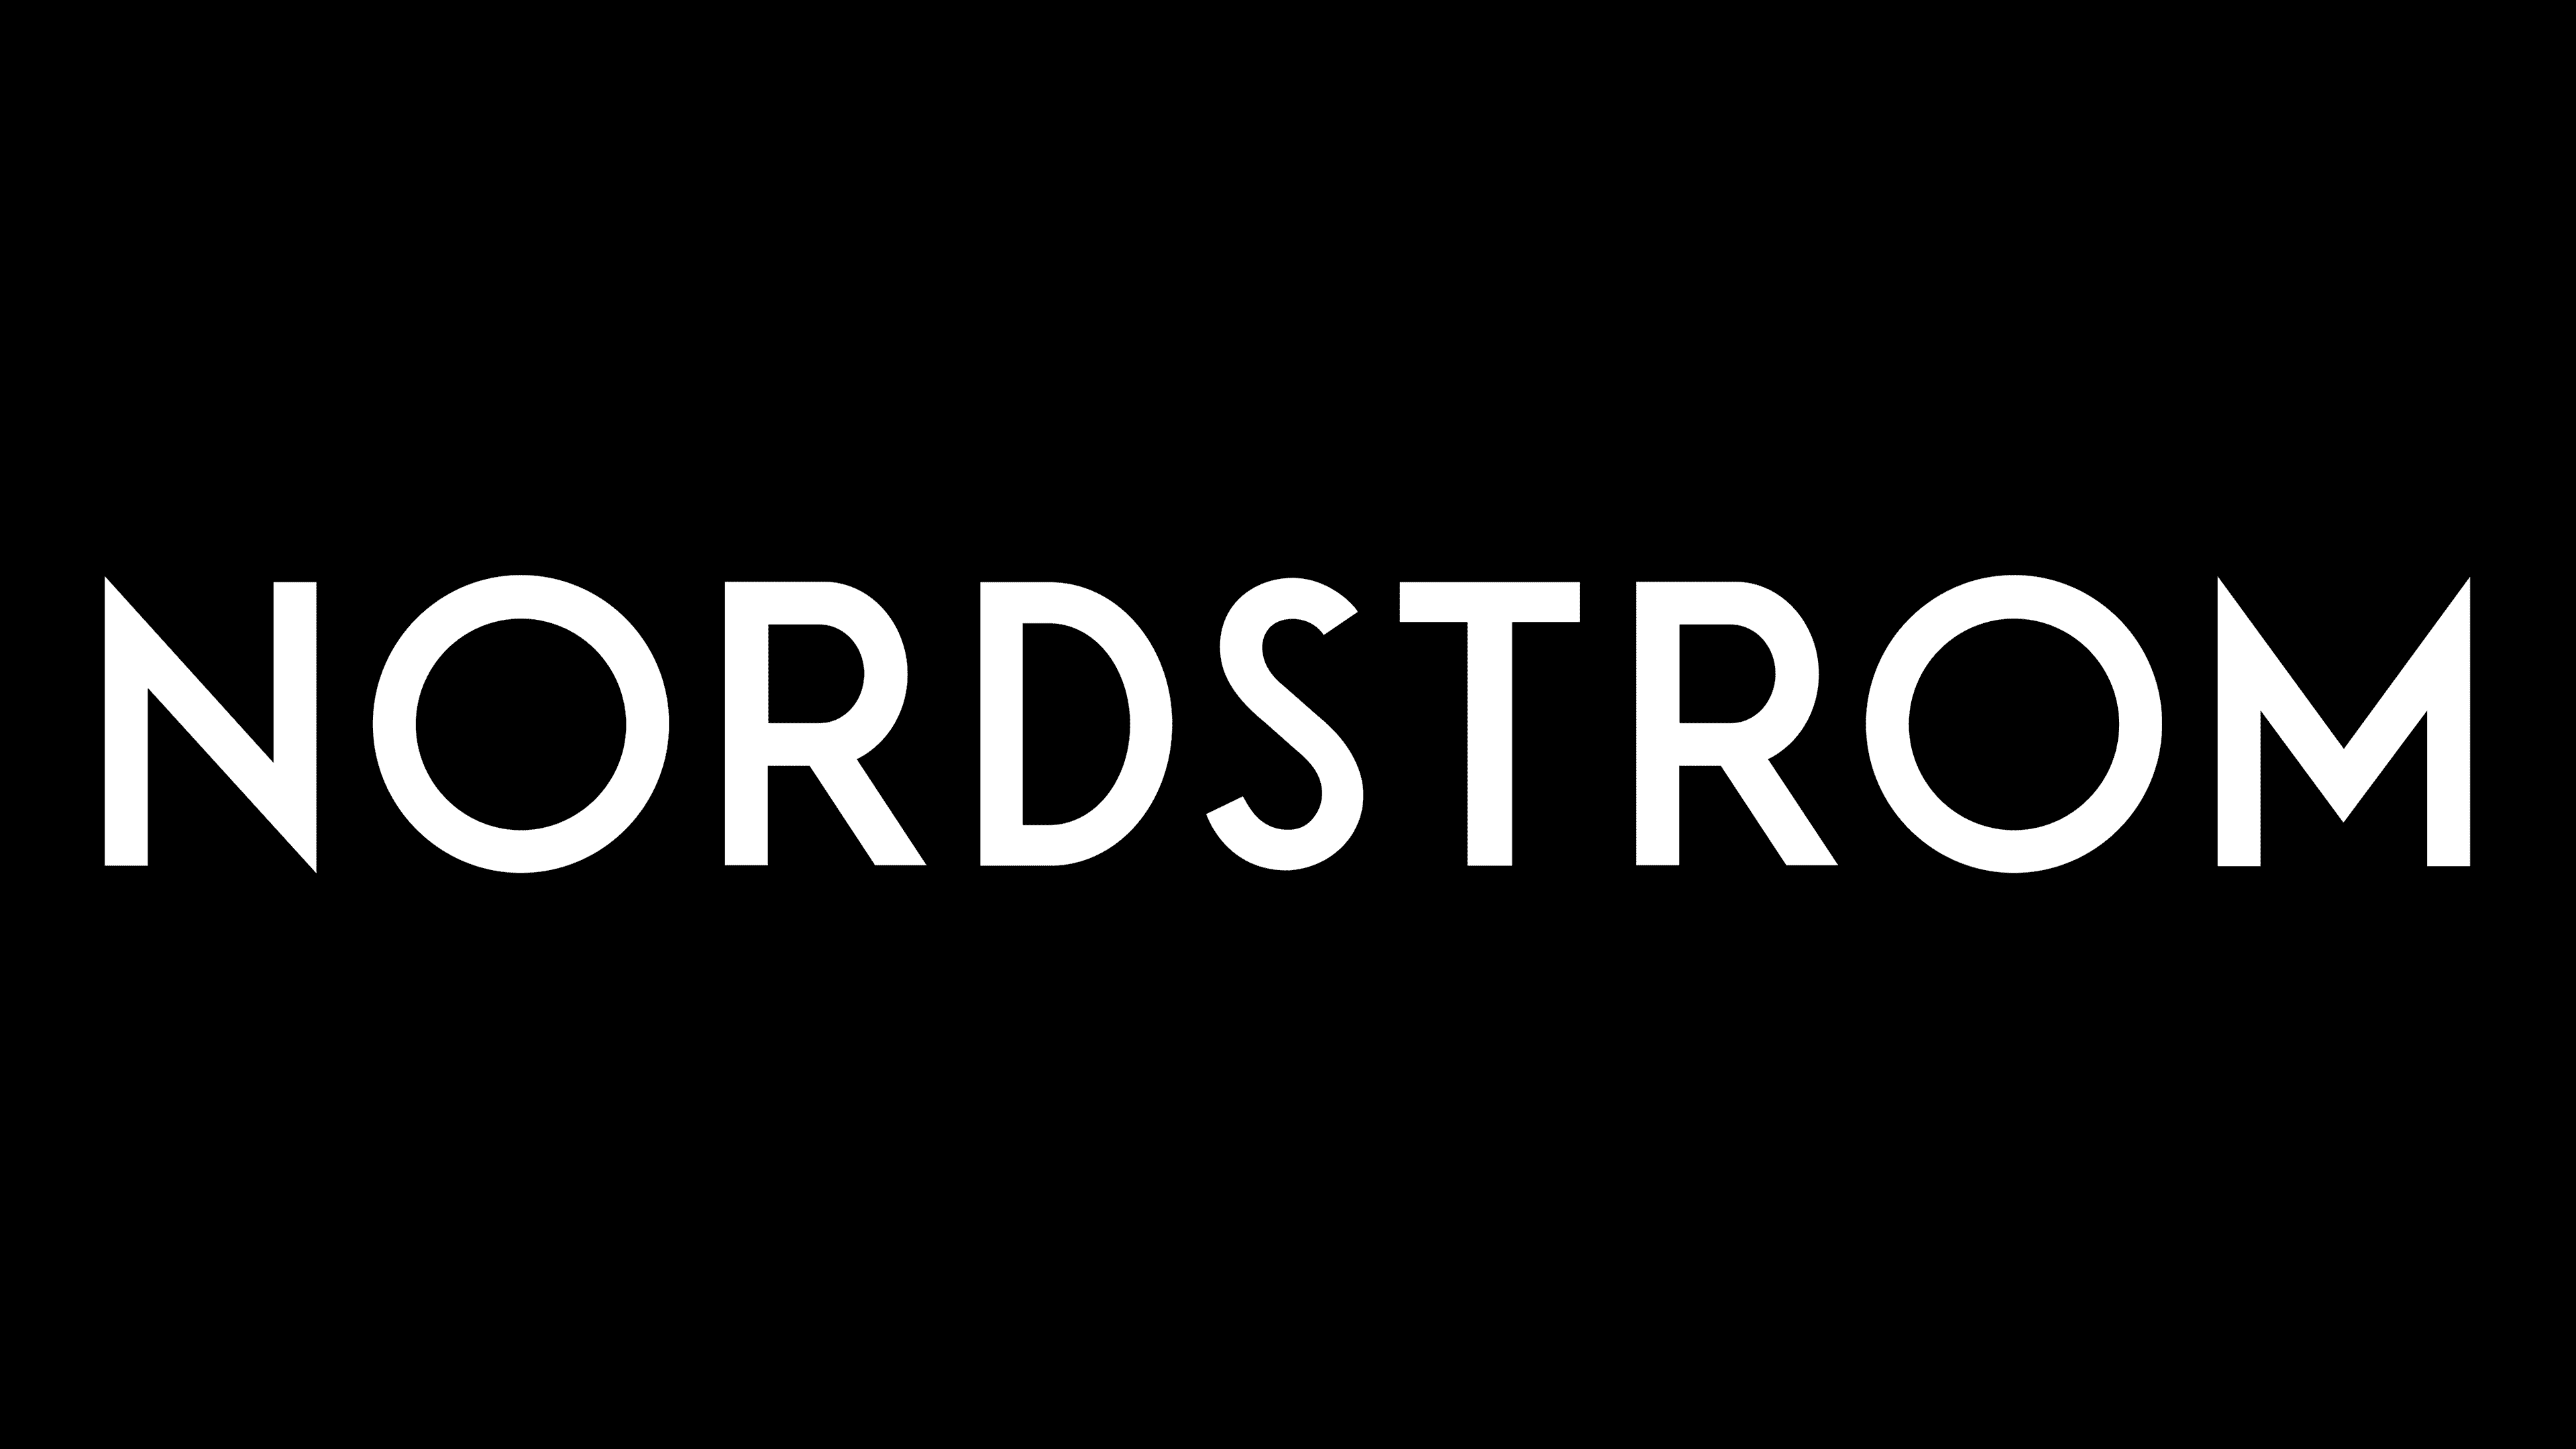 Returning Nordstrom orders with Getcho